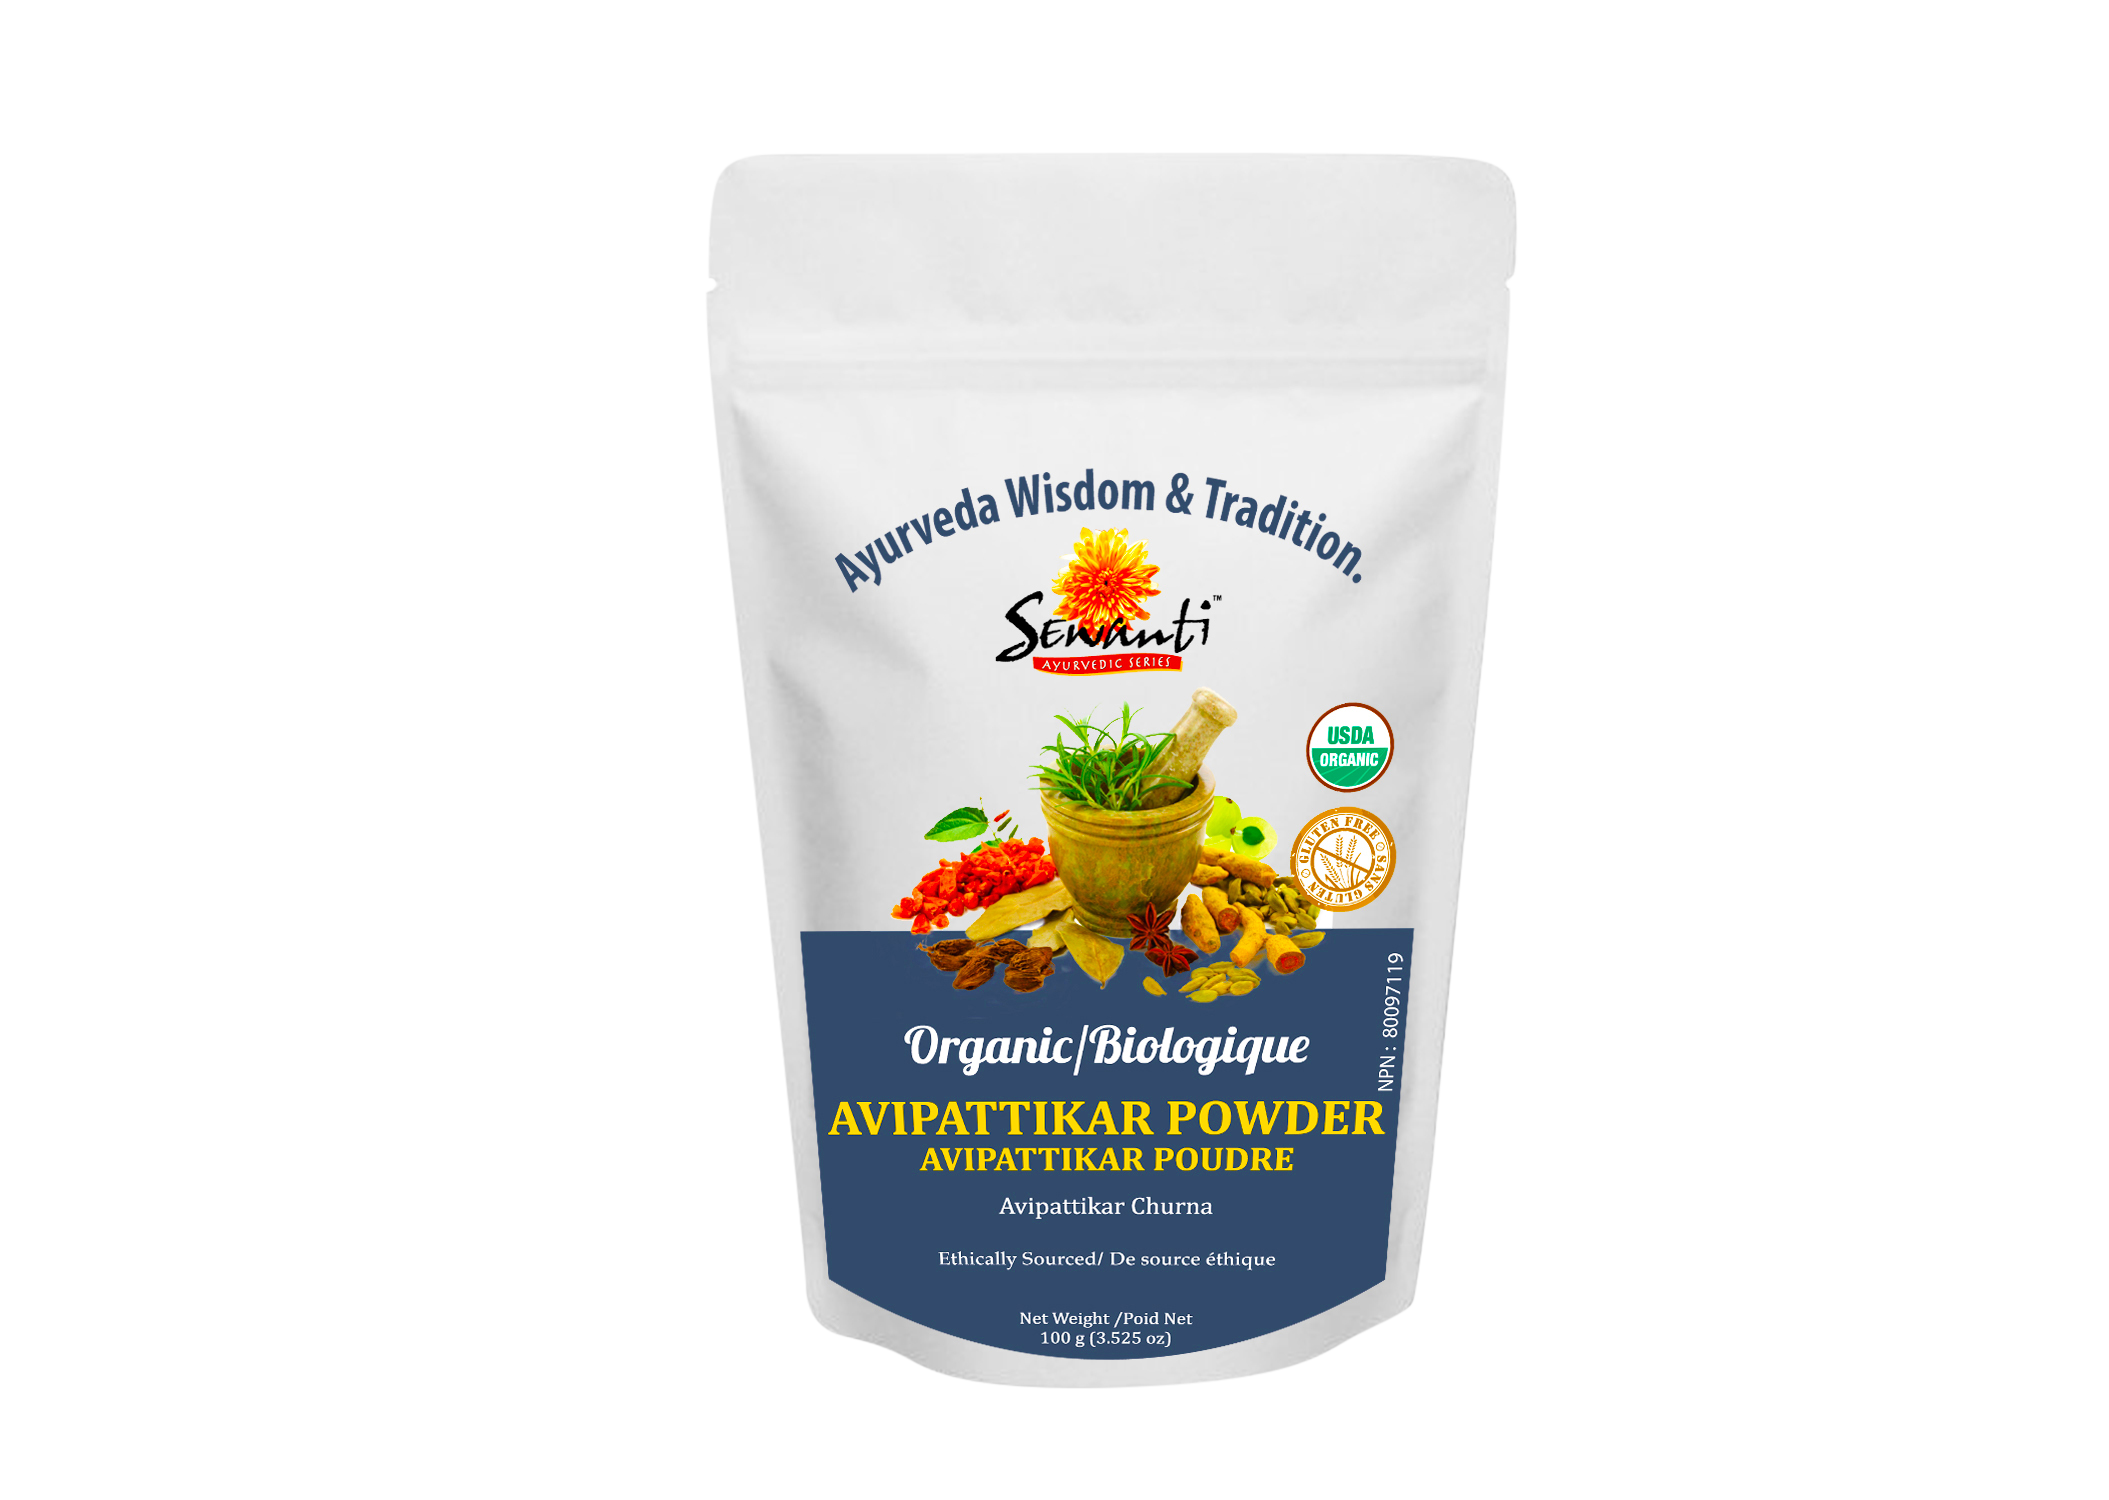 Organic Avipattikar Powder/ Churna - Balances Pitta- Avipattikar Churna is a classical mix of different herbs. Avipattikar powder is traditionally used in Ayurveda to help relieve symptoms such as heartburn and indigestion associated with Amlapitta (hyperacidity/dyspepsia). Avipattikar Churna is traditionally used in herbal medicine as a digestive tonic to promote digestive fire, increase appetite, and aid in digestion